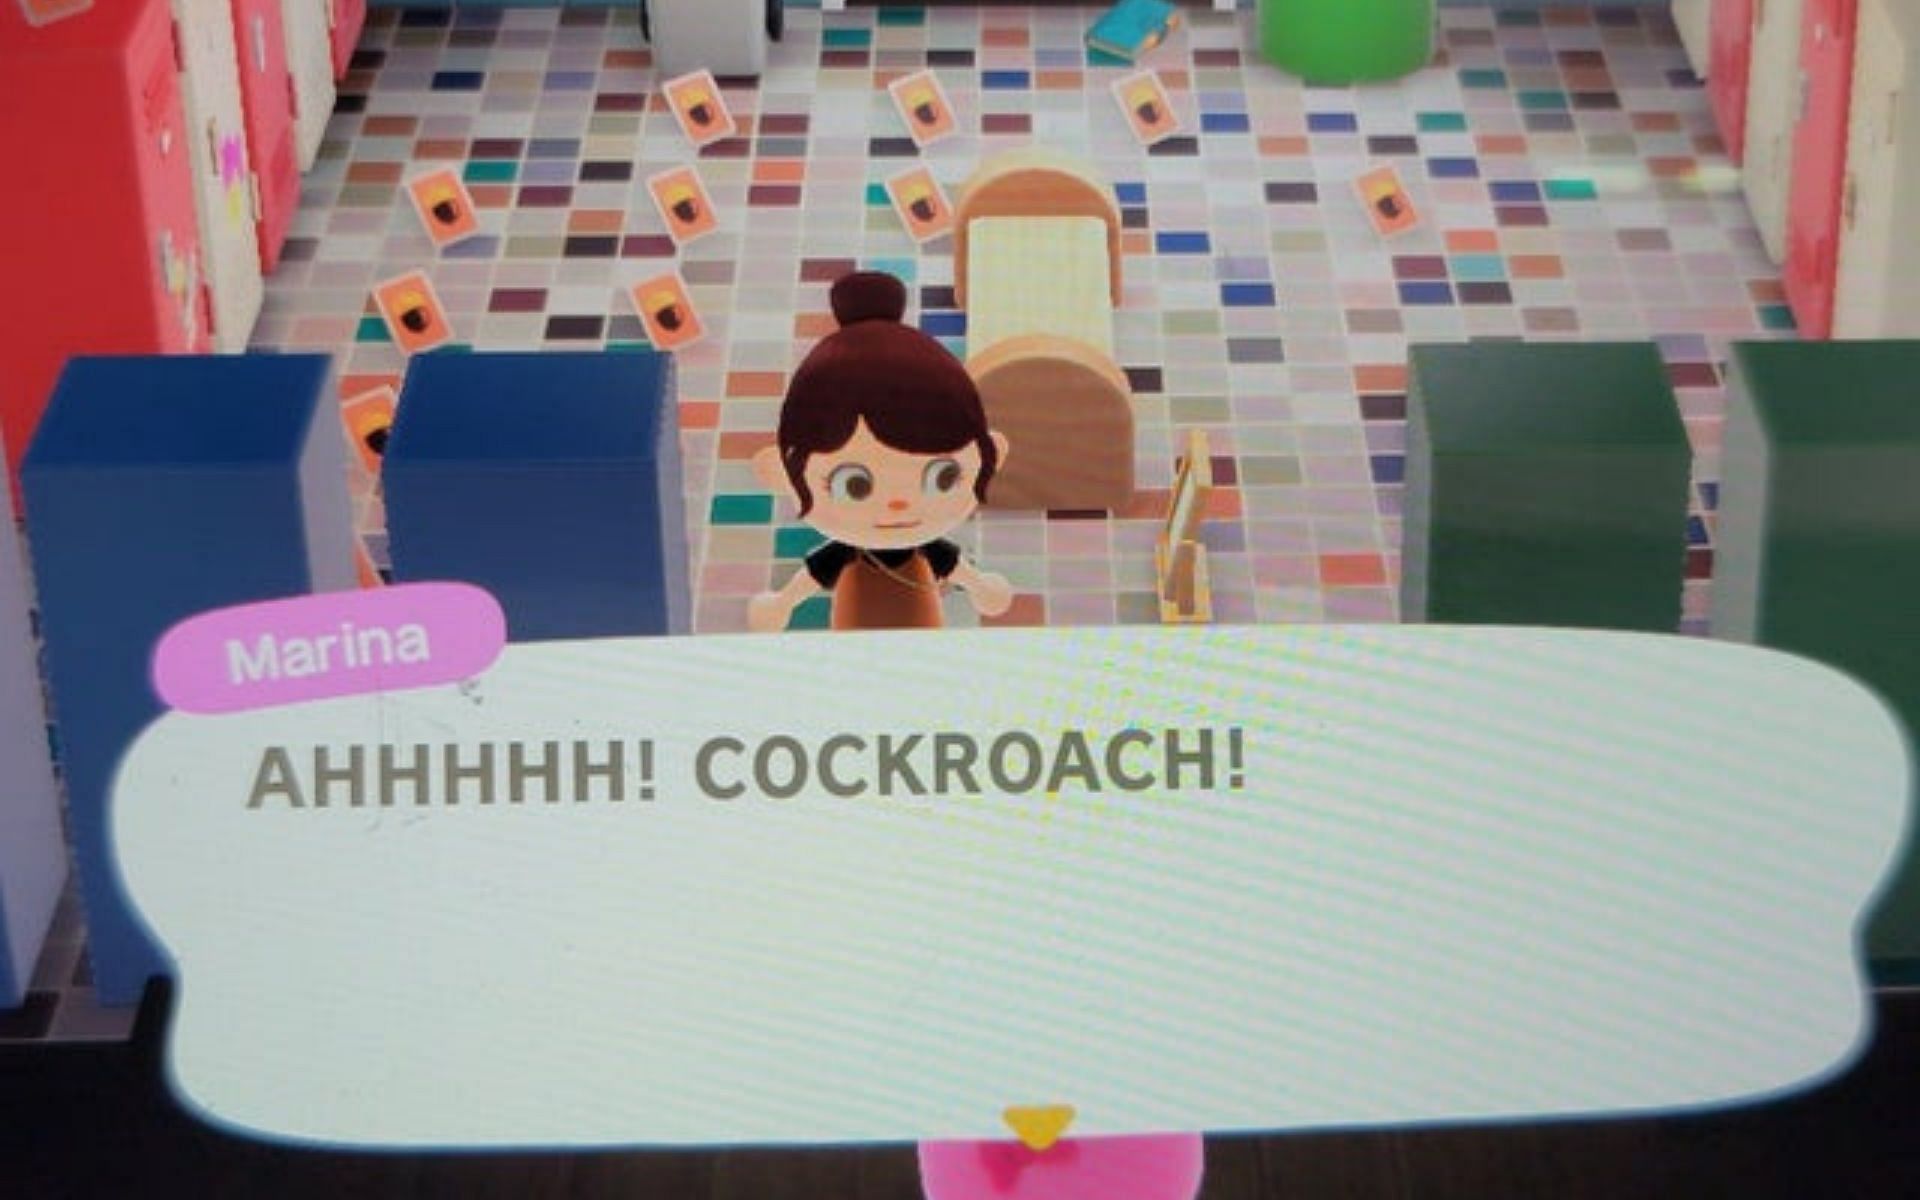 Getting rid of cockroaches in Animal Crossing is quite tedious (Image via r/AnimalCrossing/Reddit)